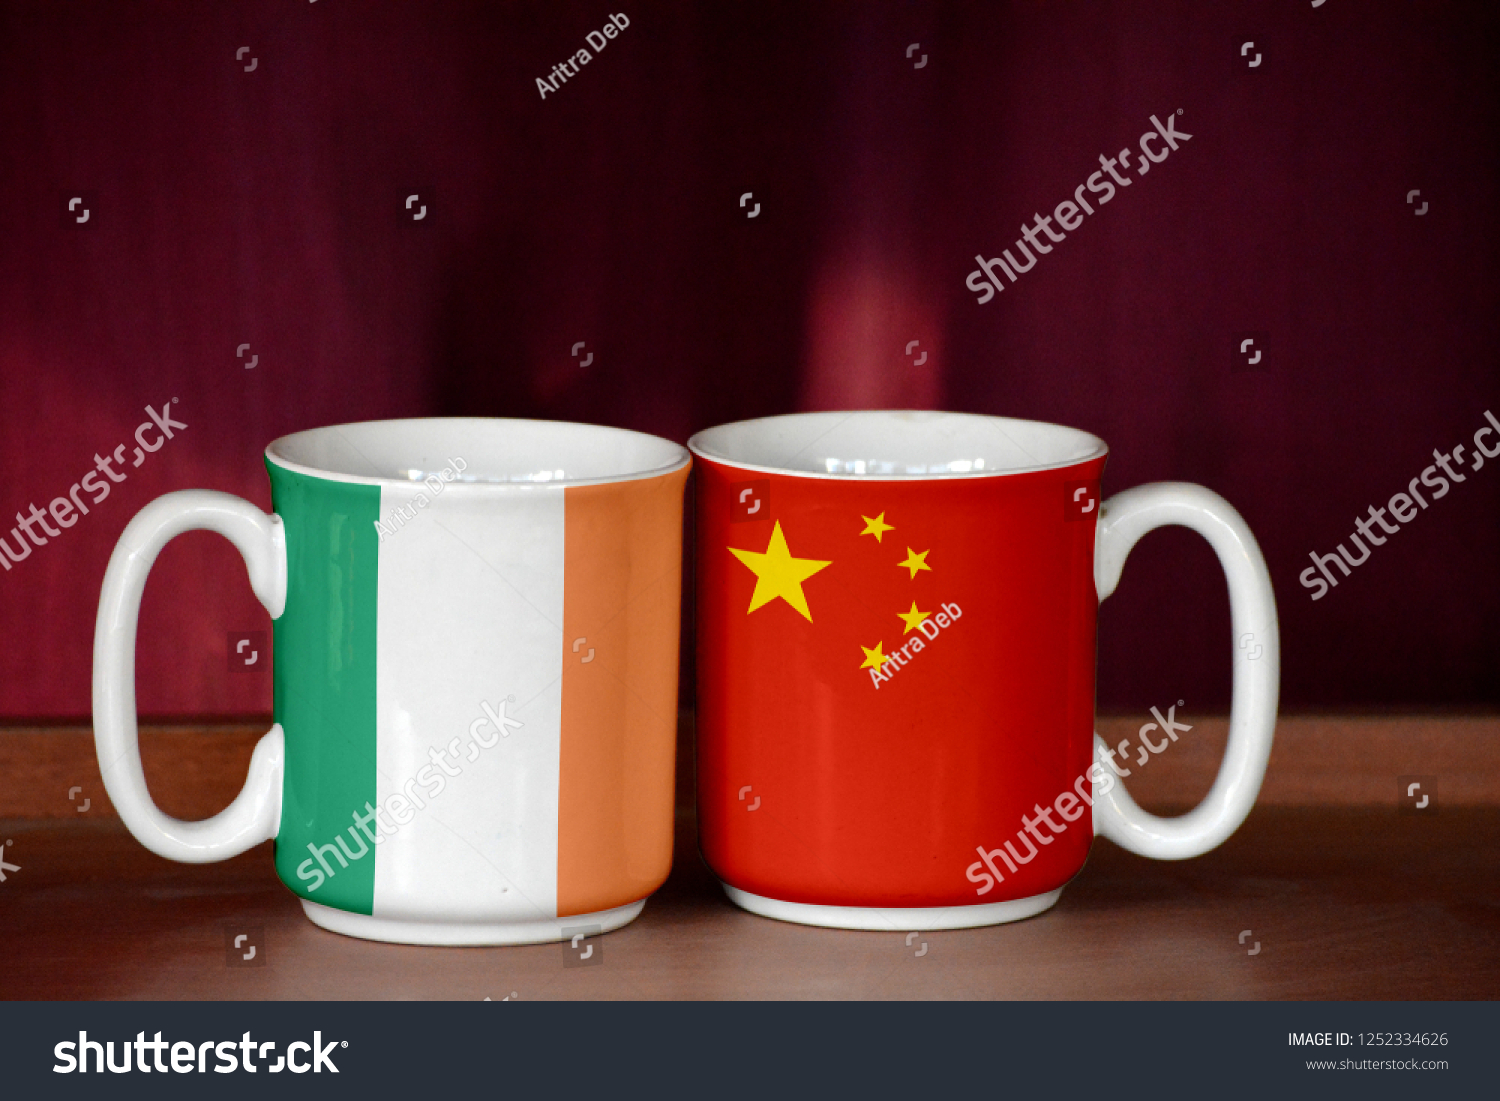 China and Ireland Ireland flag on two cups with blurry background #1252334626